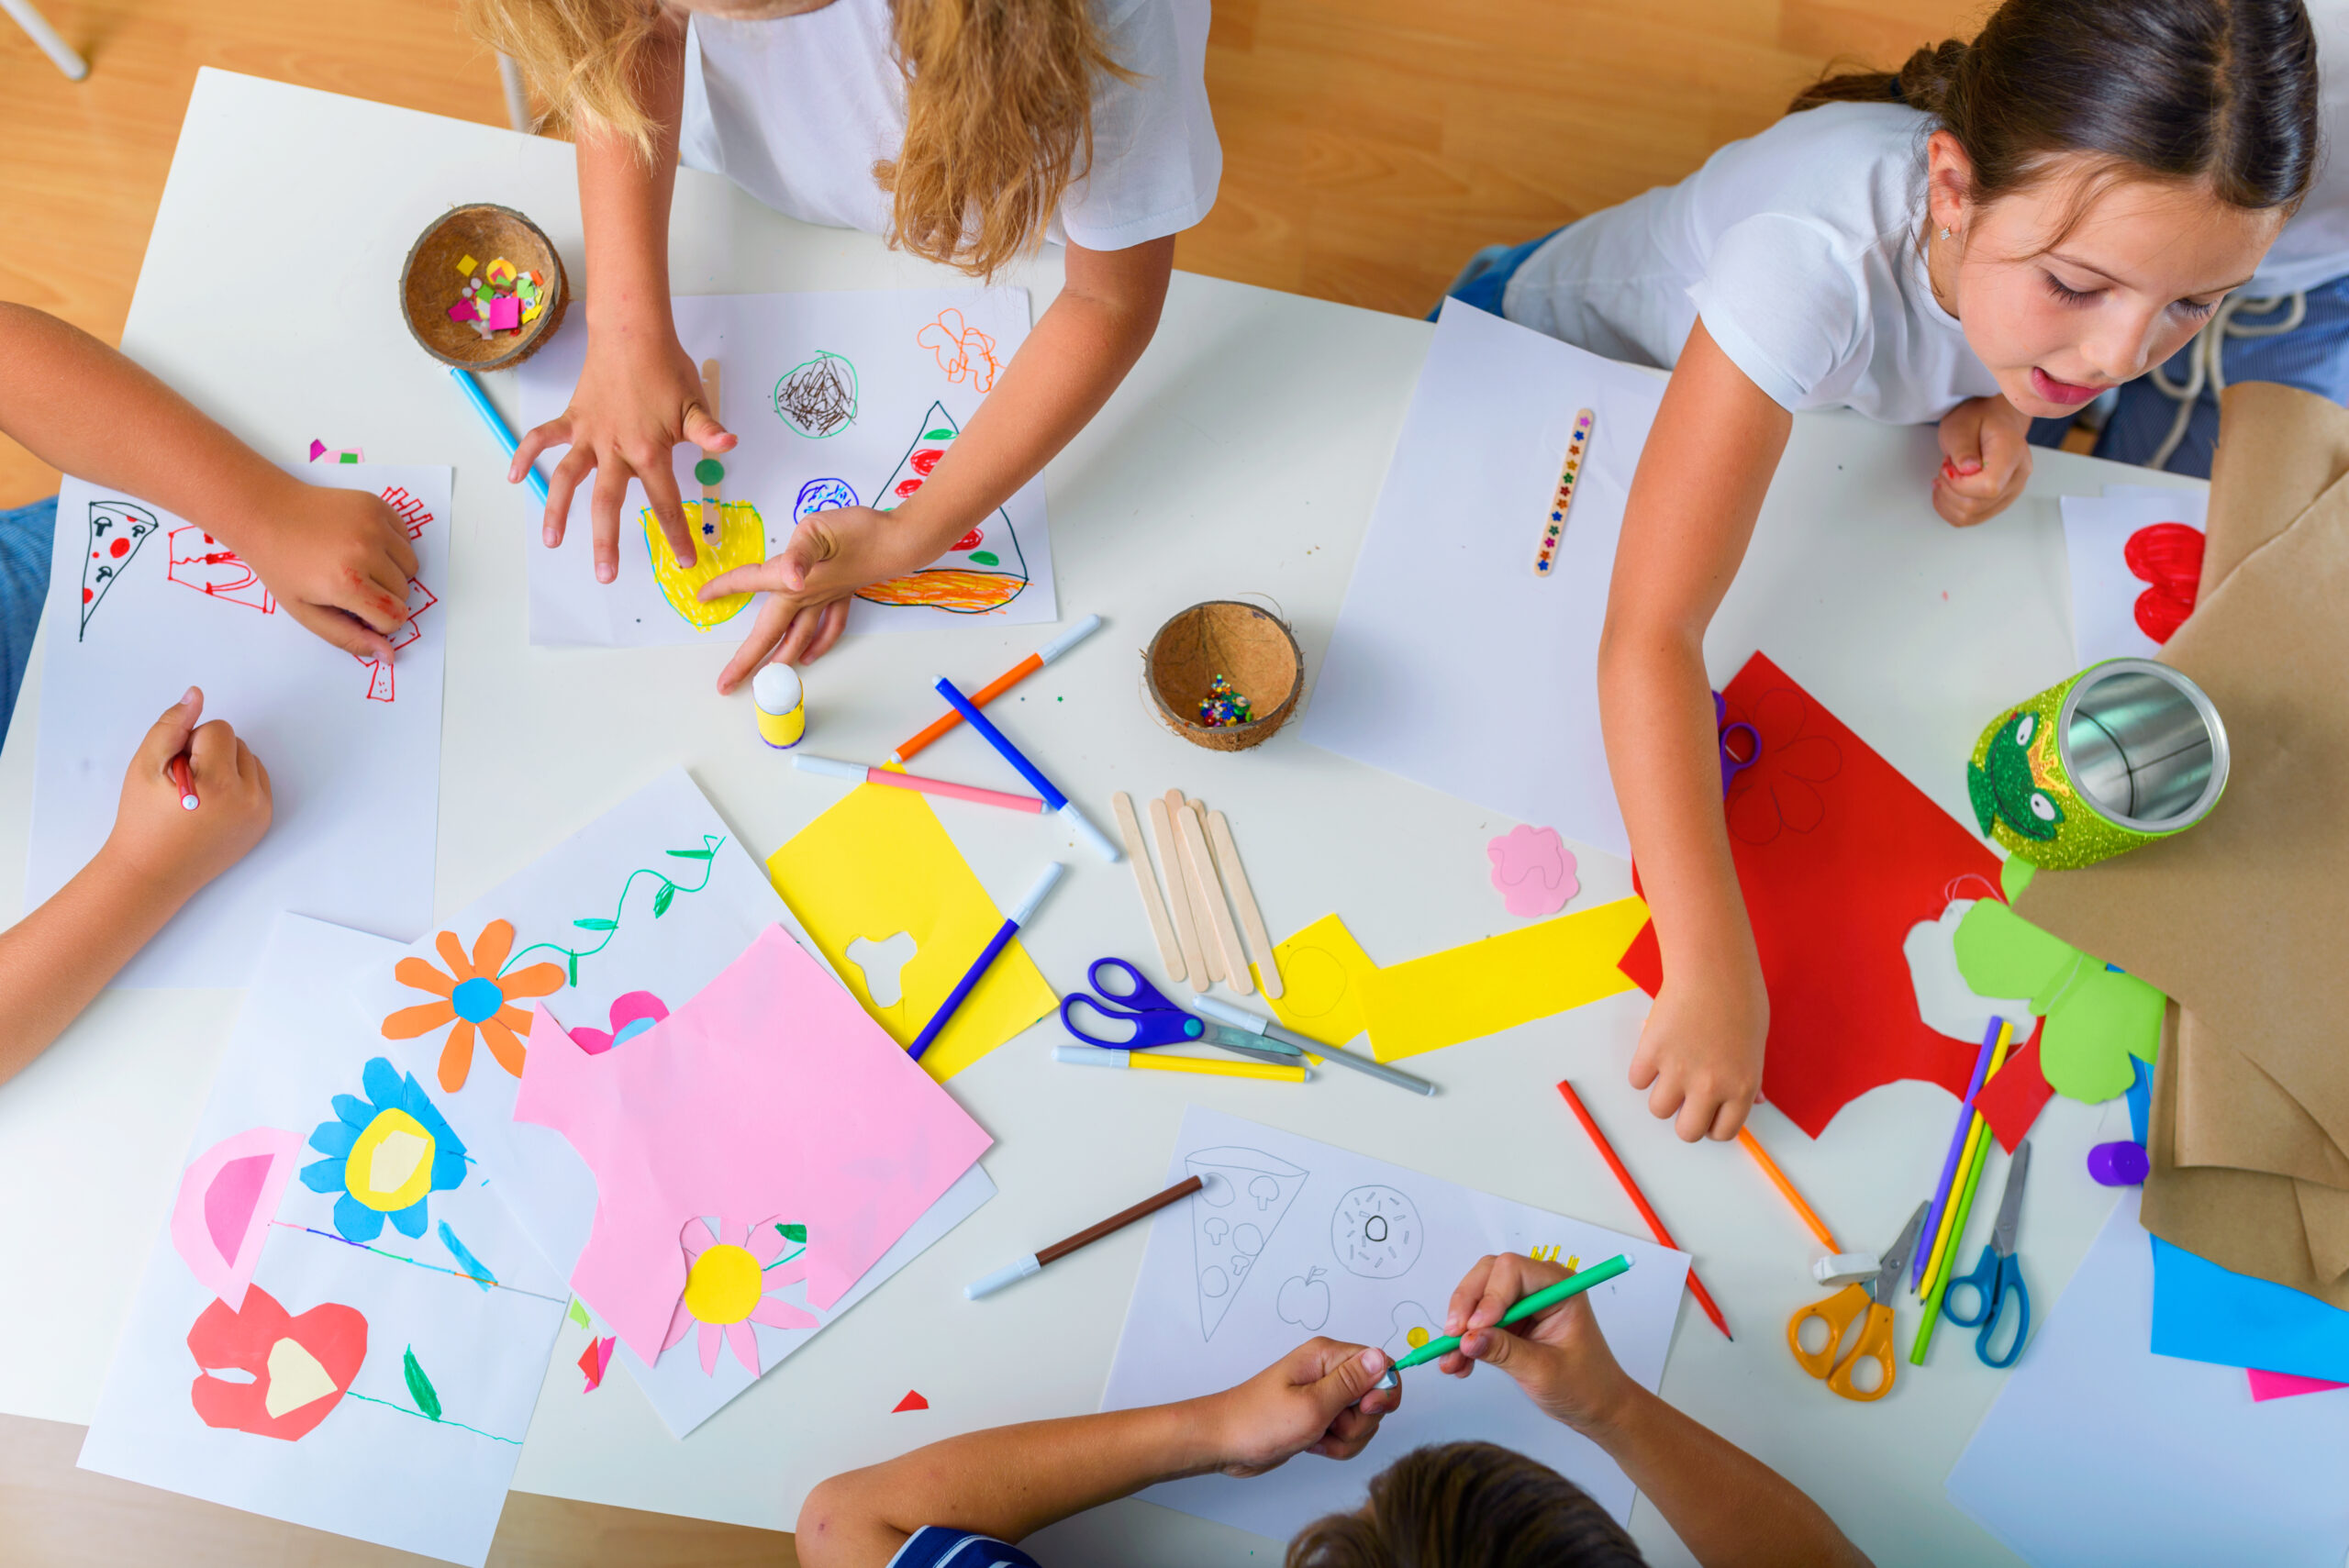 creative-kids-creative-arts-and-crafts-classes-in-after-school